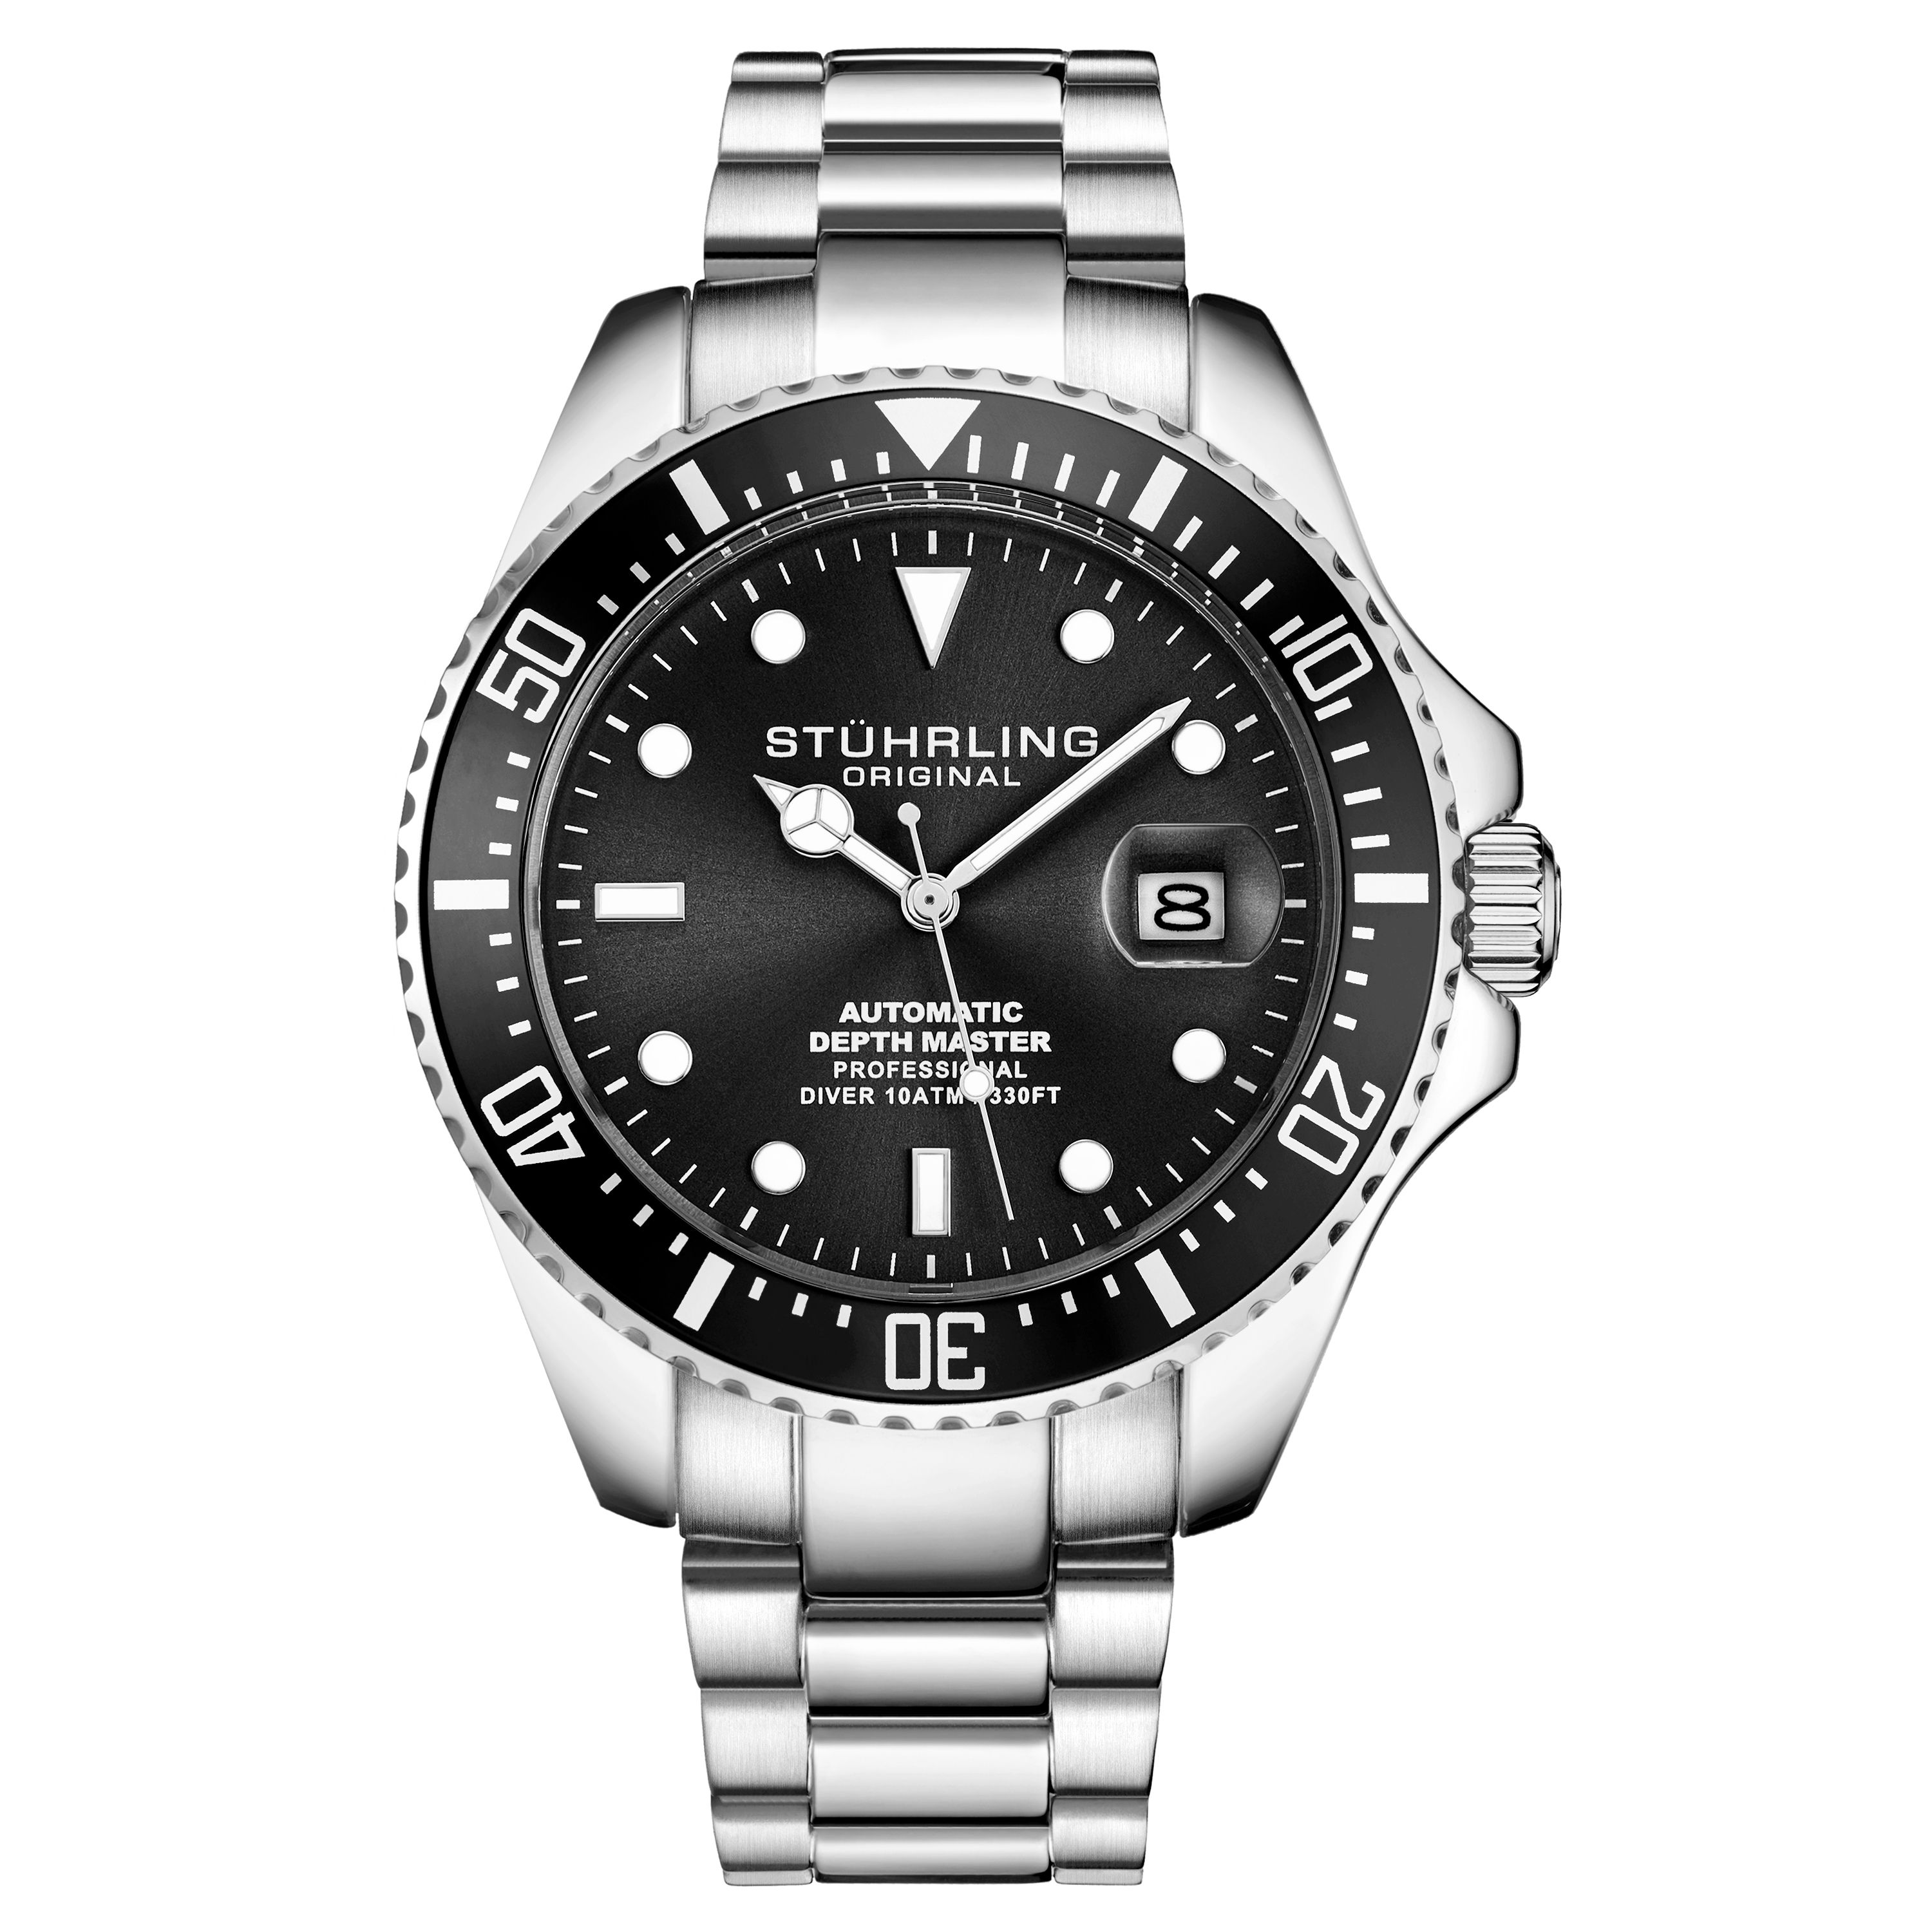 Men's Automatic Diver Watch, Silver Case, Black Dial, Silver Stainless Steel Bracelet